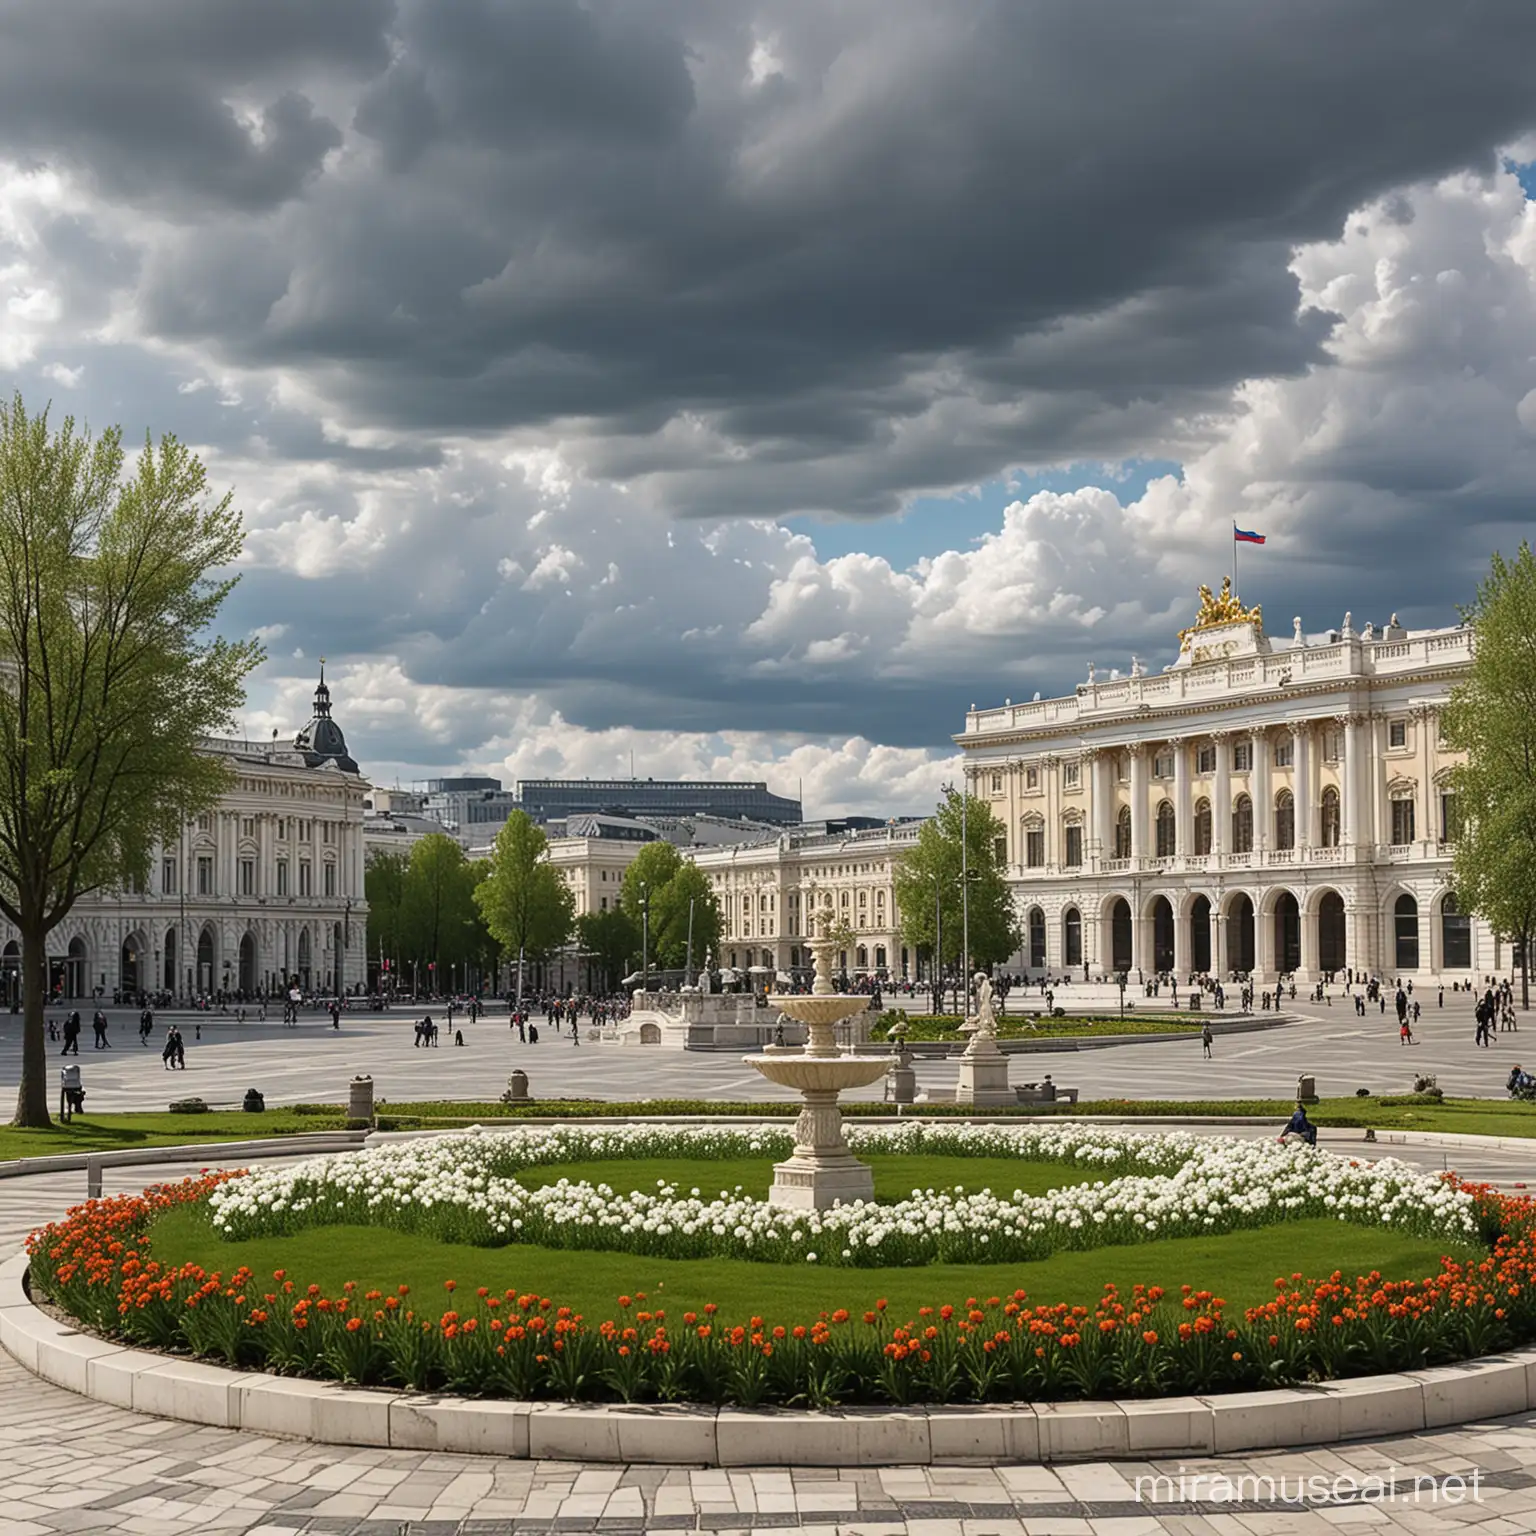 during a new spring day we see the capital city main square, the buildings are all made of light marble in a neoclassical architecture, there are plants, trees and flowers, the whole city style is inspired to an anglo-saxon and russian style, it's a sunny day with a few white clouds, there are green hills and woods on the background as the landscape. 